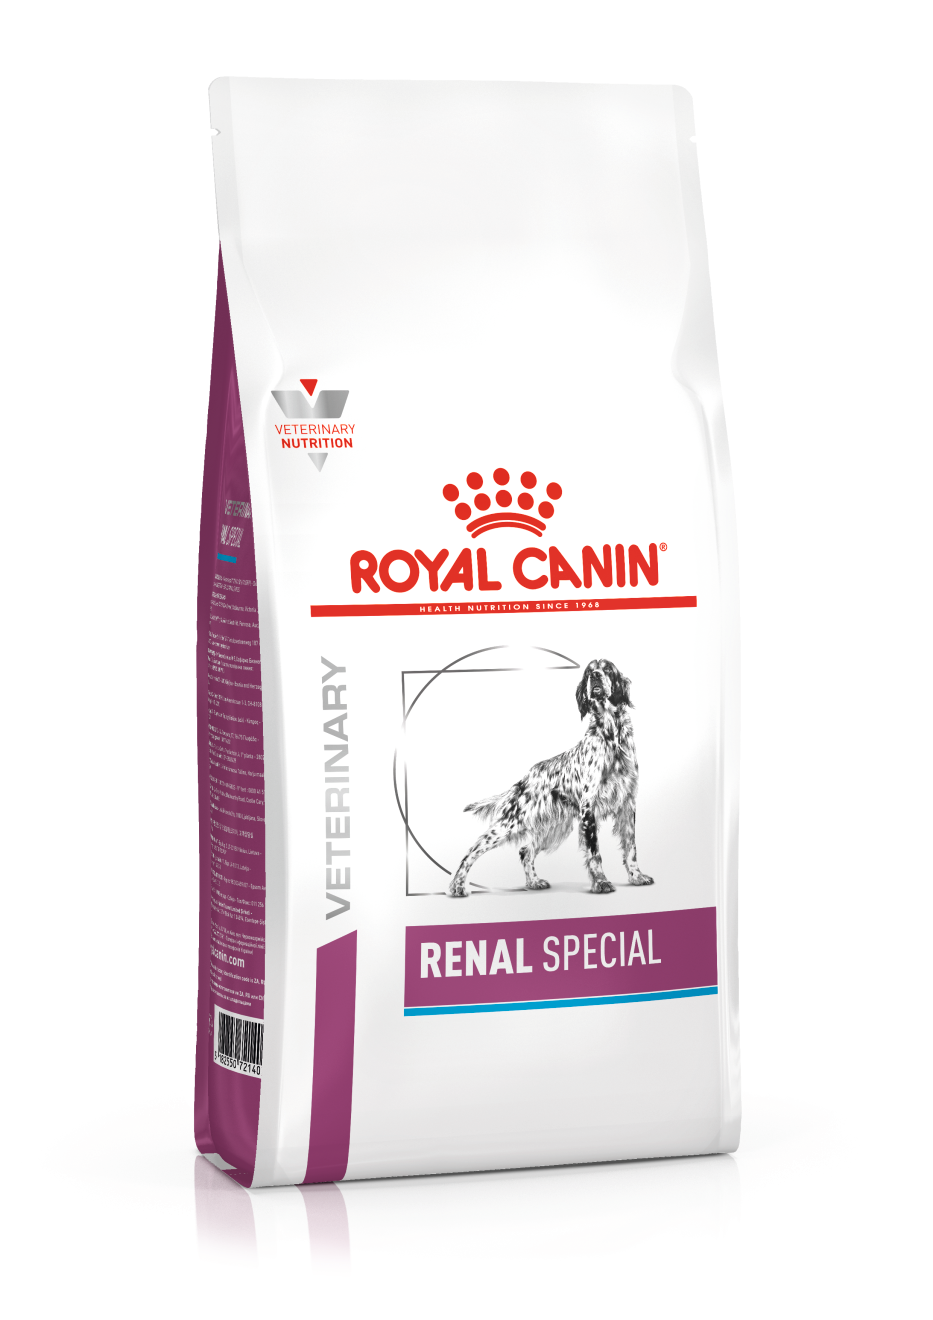 Royal Canin Renal Special hond 1 x 2 kg